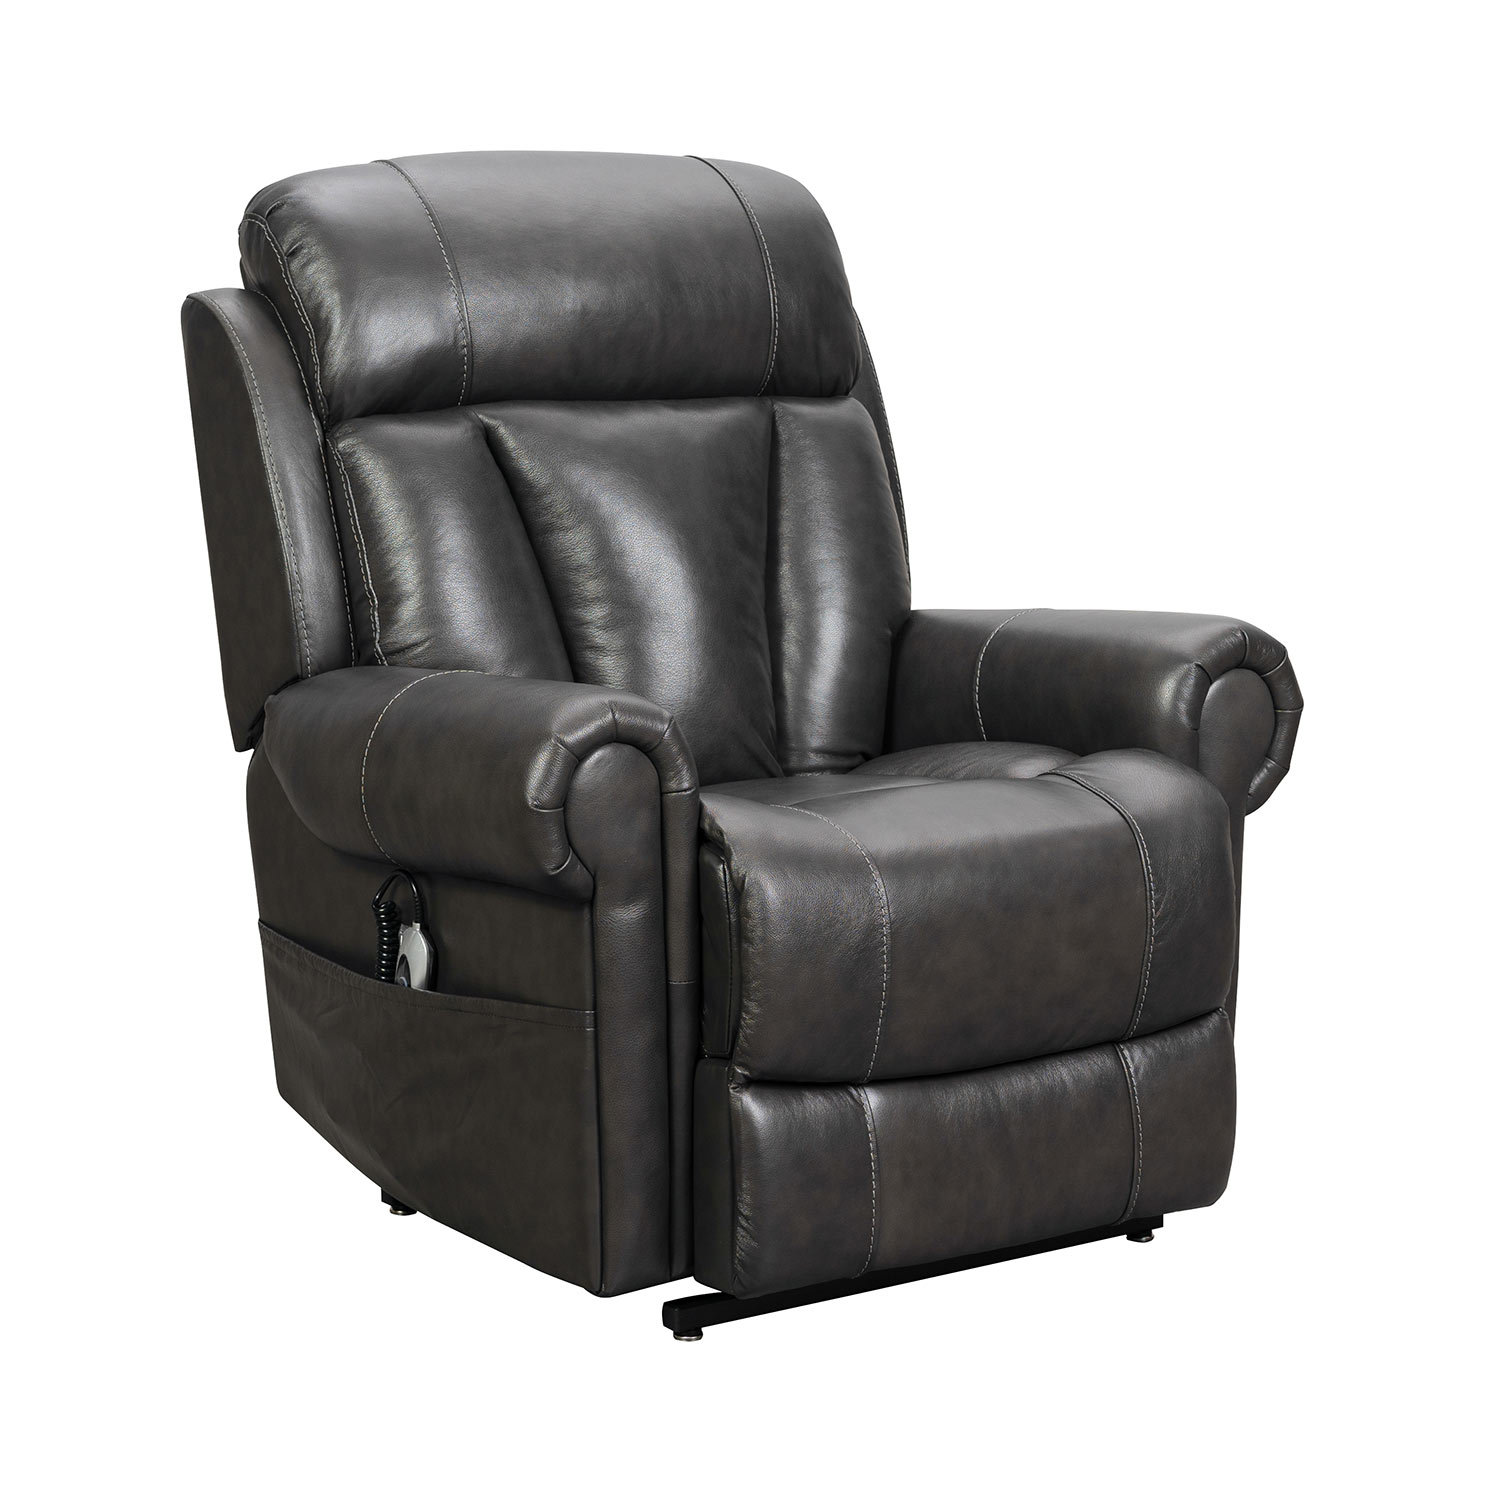 Barcalounger Lyndon Lift Chair Recliner with Power Head Rest and Lumbar - Venzia Grey/Leather Match